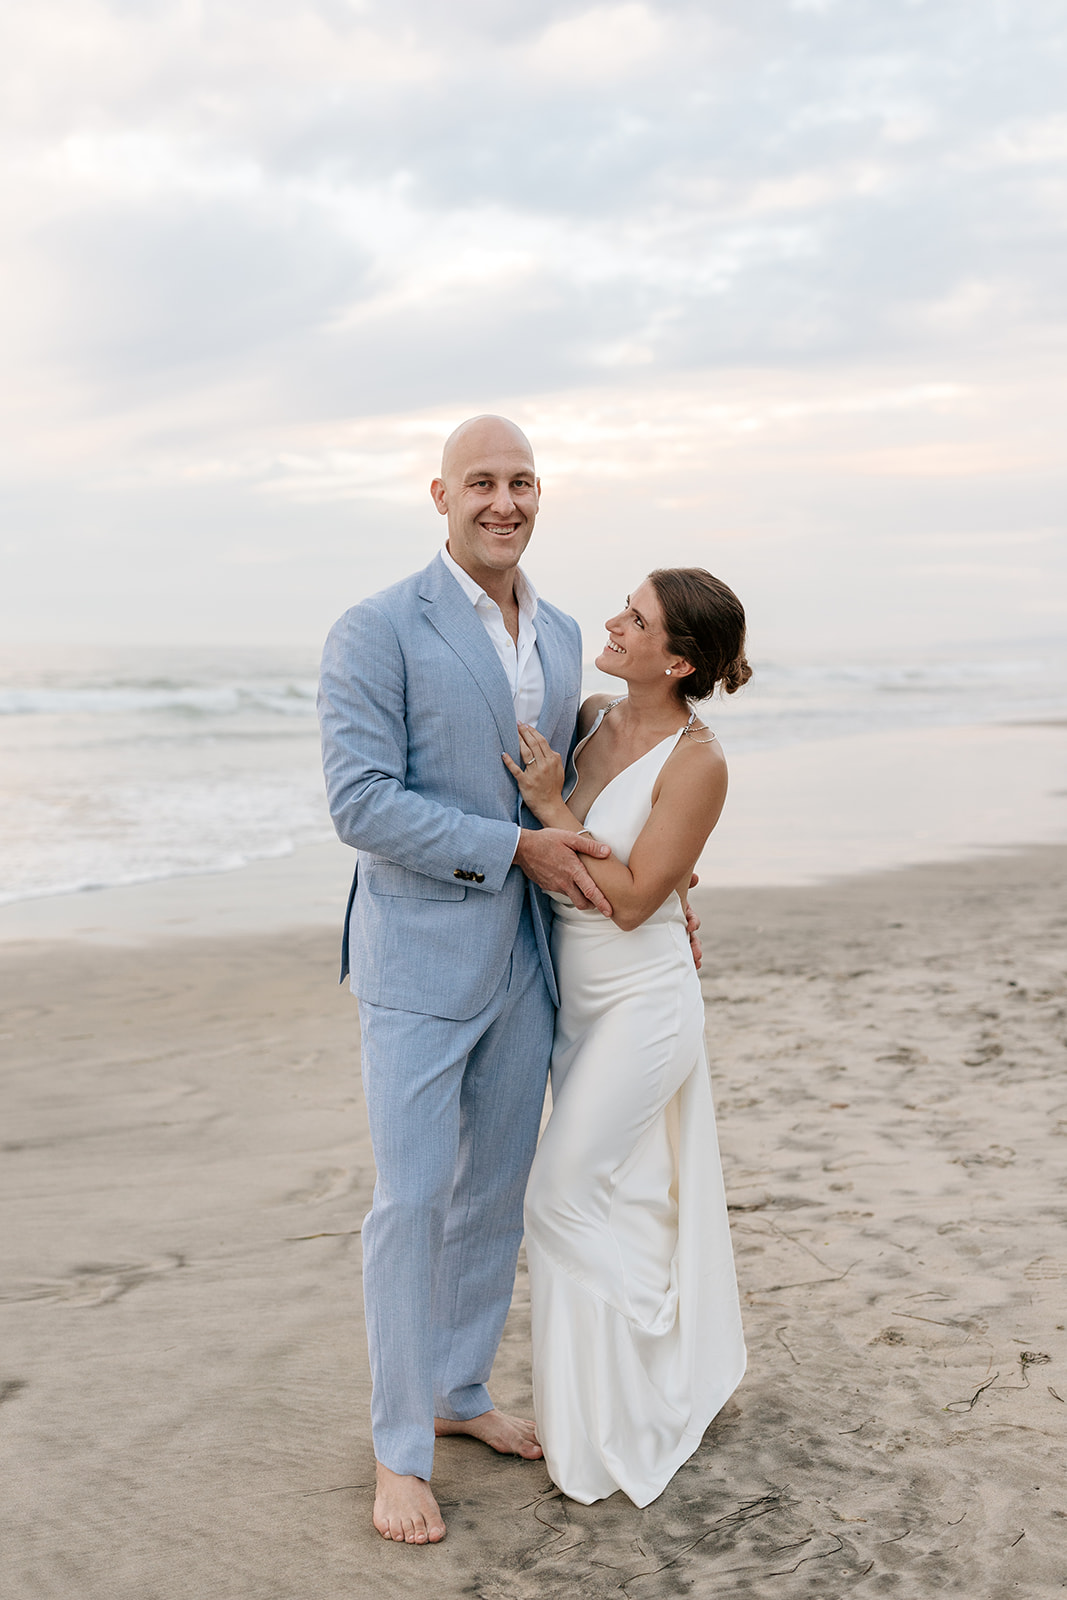 backyard beach wedding elopement encinitas southern california socal bride and groom pictures white a line wedding dress